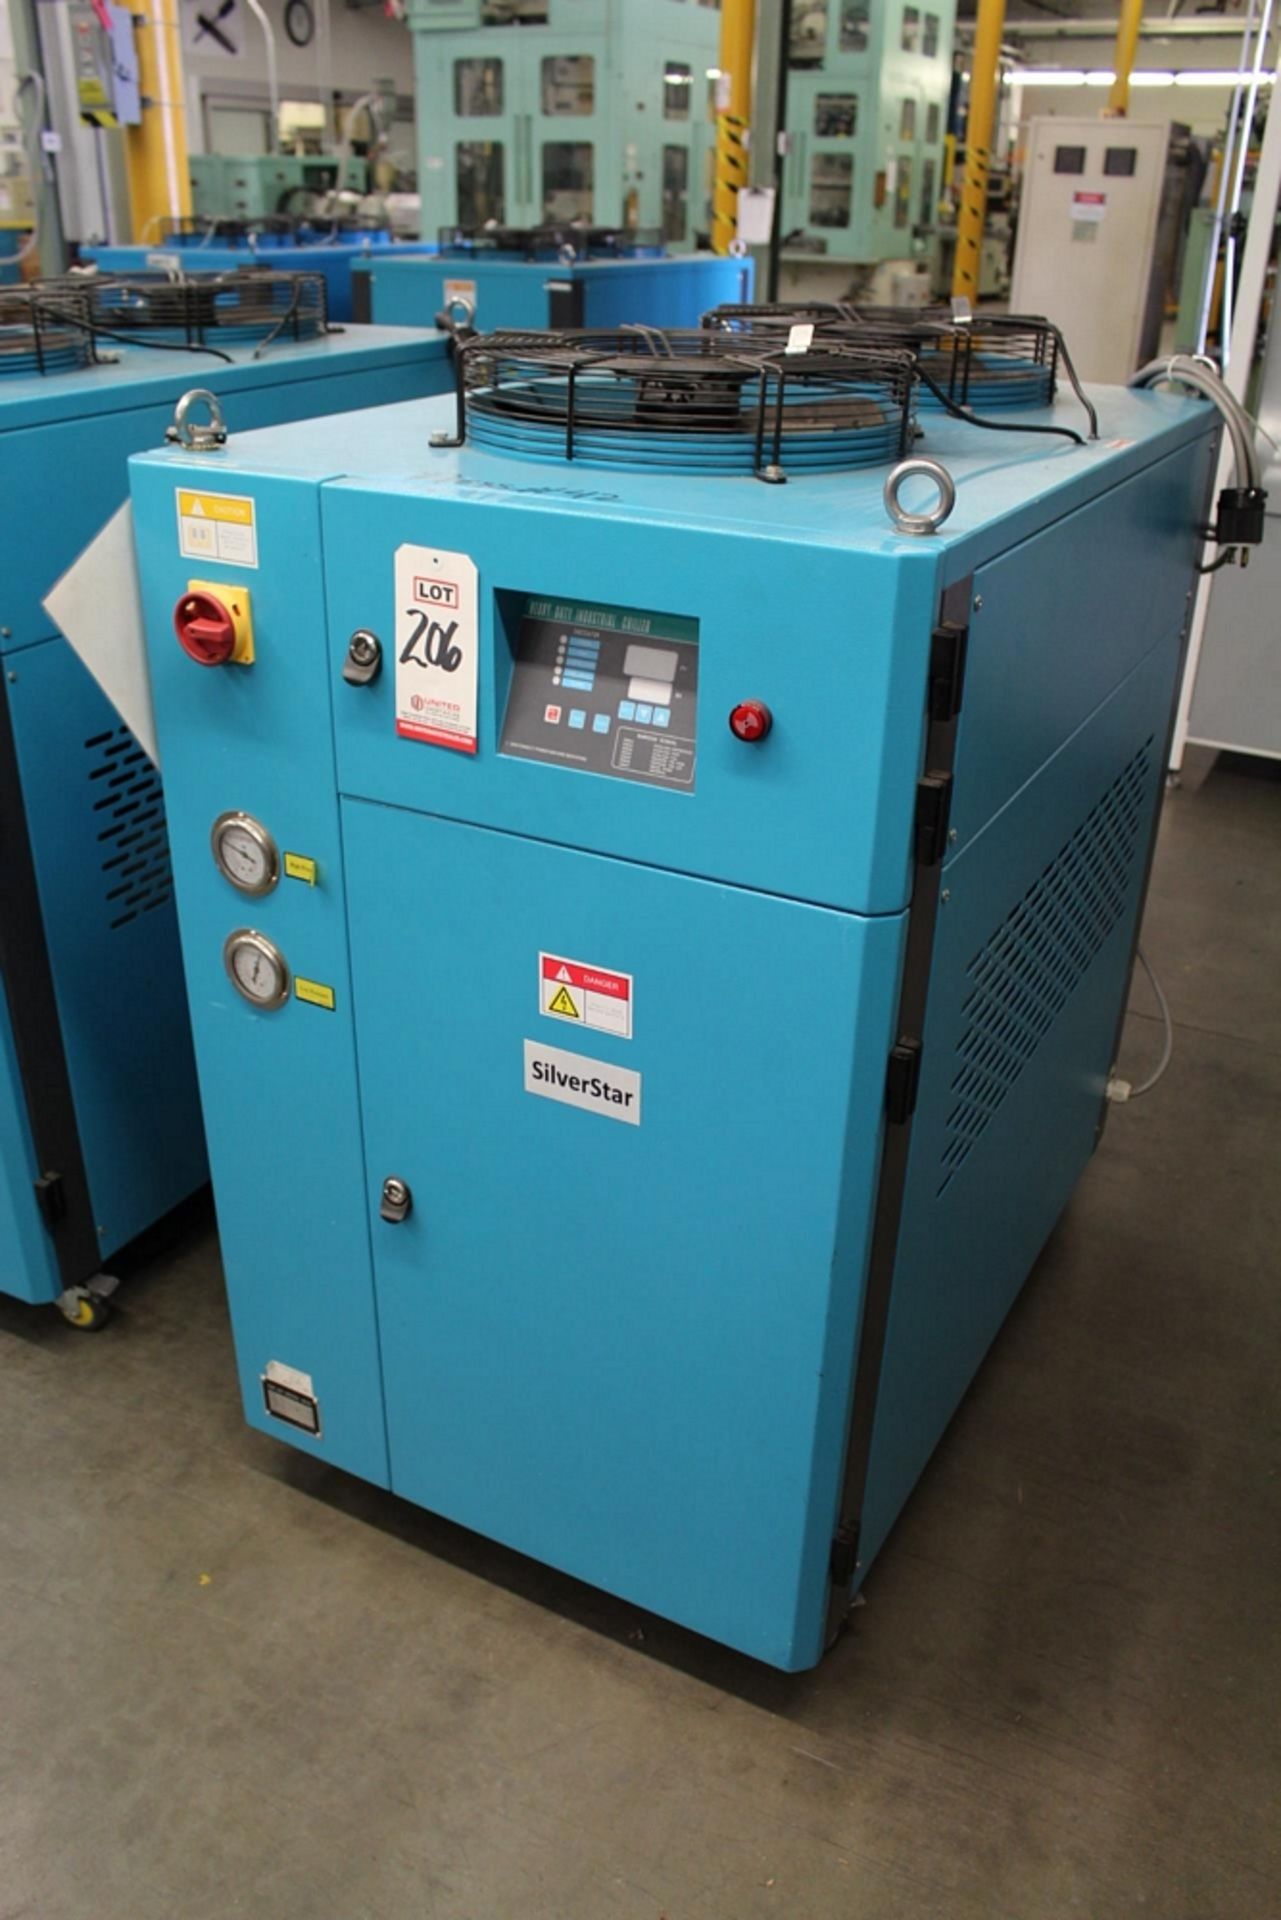 2014 SILVER STAR HEAVY DUTY INDUSTRIAL CHILLER, MODEL SAC-05, EXTERNAL AIR COOLED, AUXILIARY BOOSTER